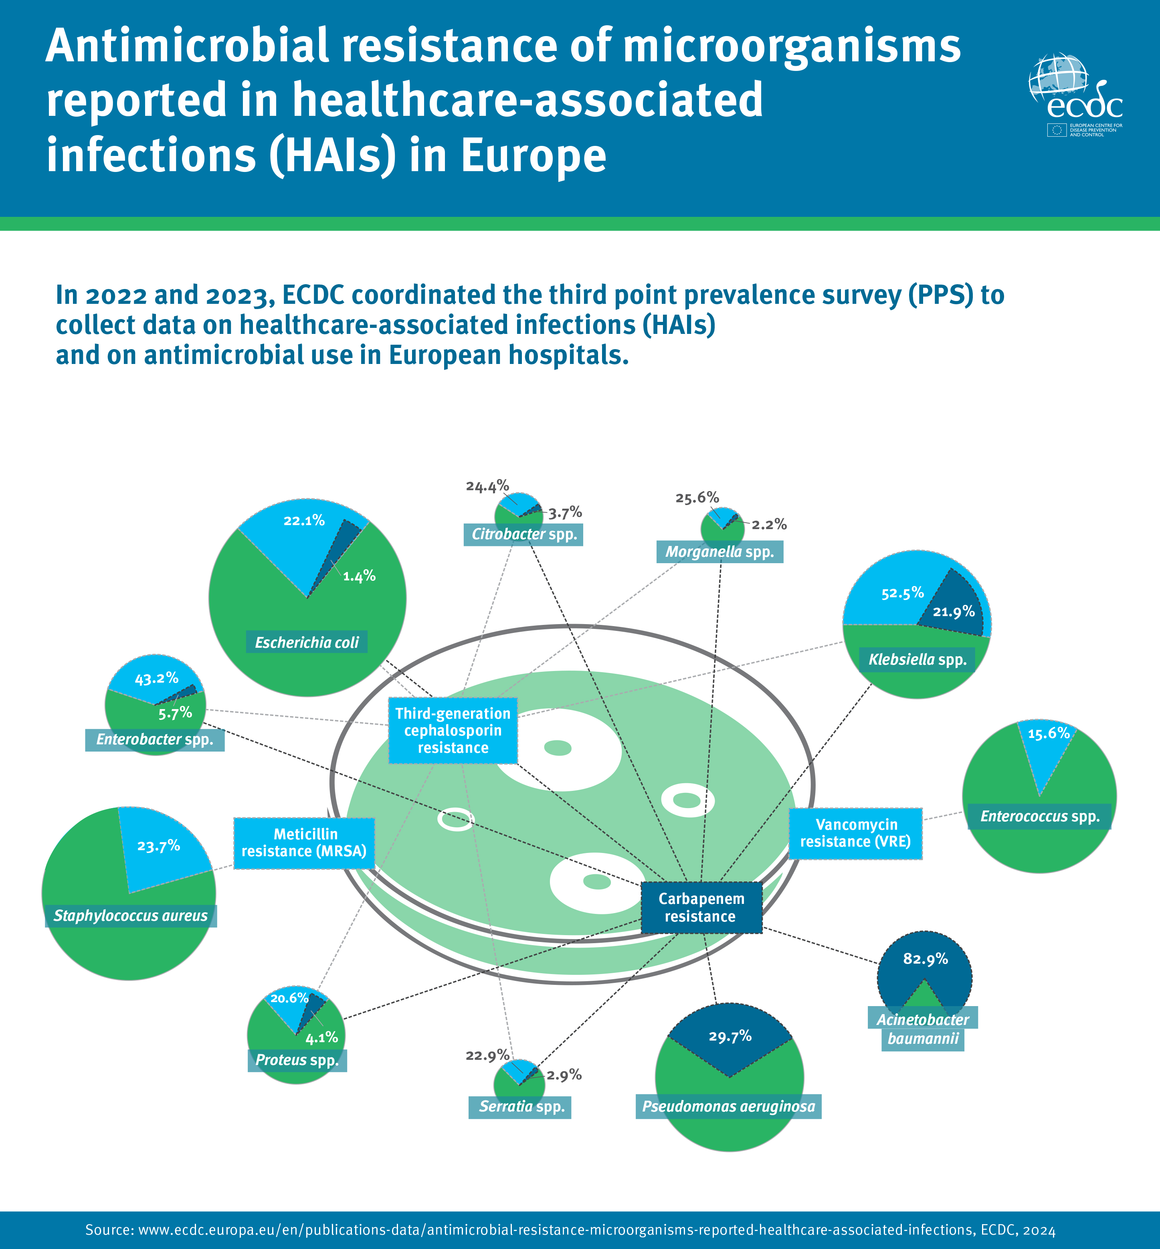 Antimicrobial resistance of microorganisms reported in healthcare-associated infections (HAIs)